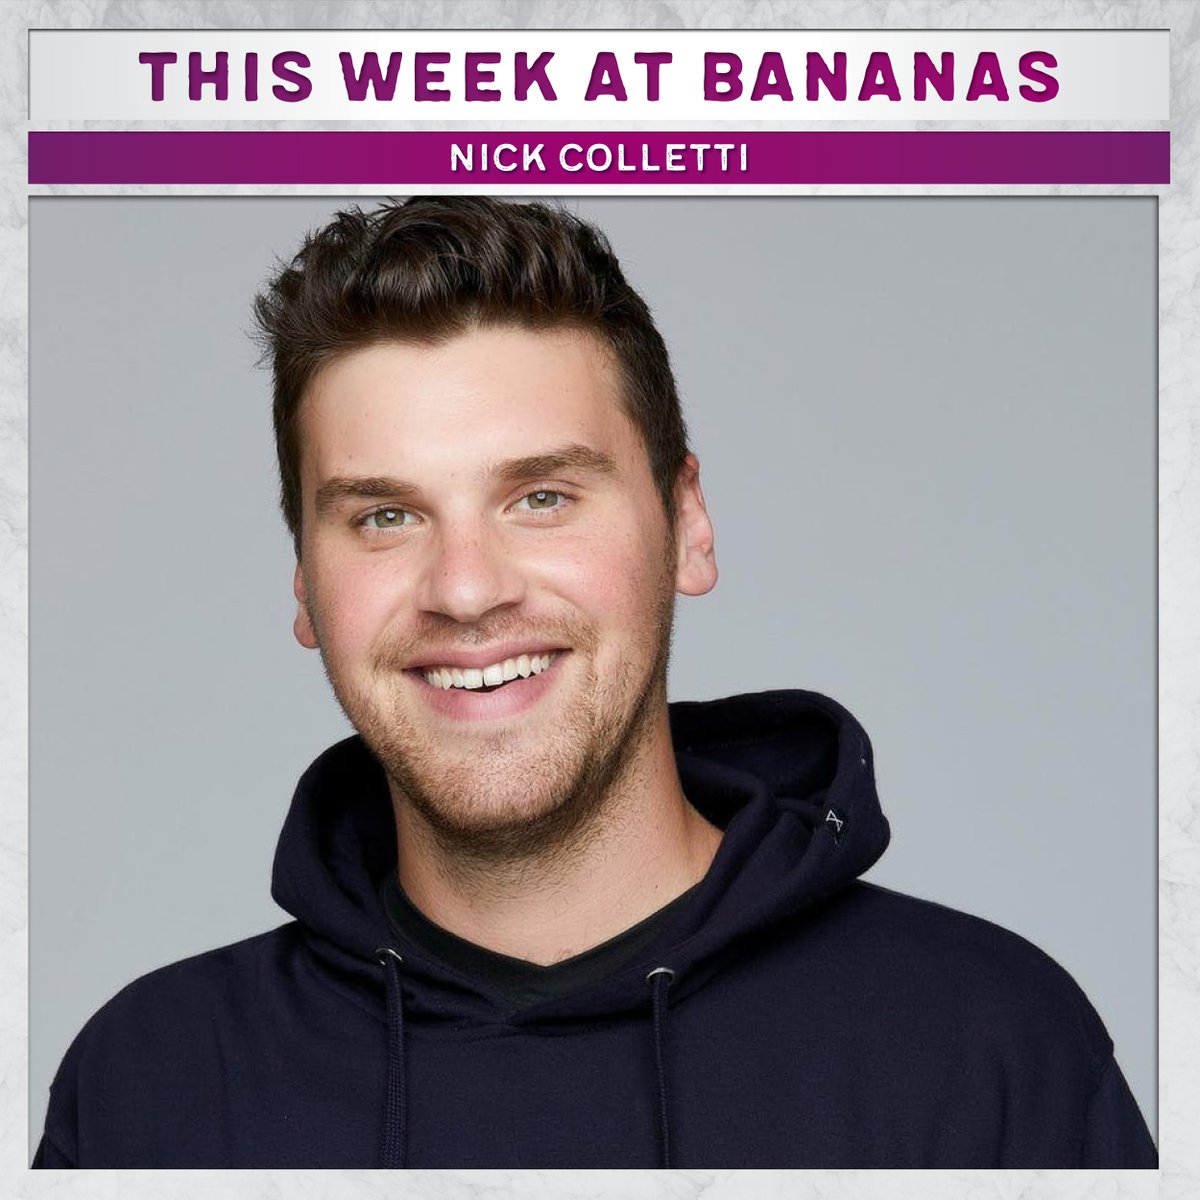 This Week at Bananas | @Nick_Colletti is in the club Friday + Saturday! Snag tickets here: bit.ly/2Nw7RC9